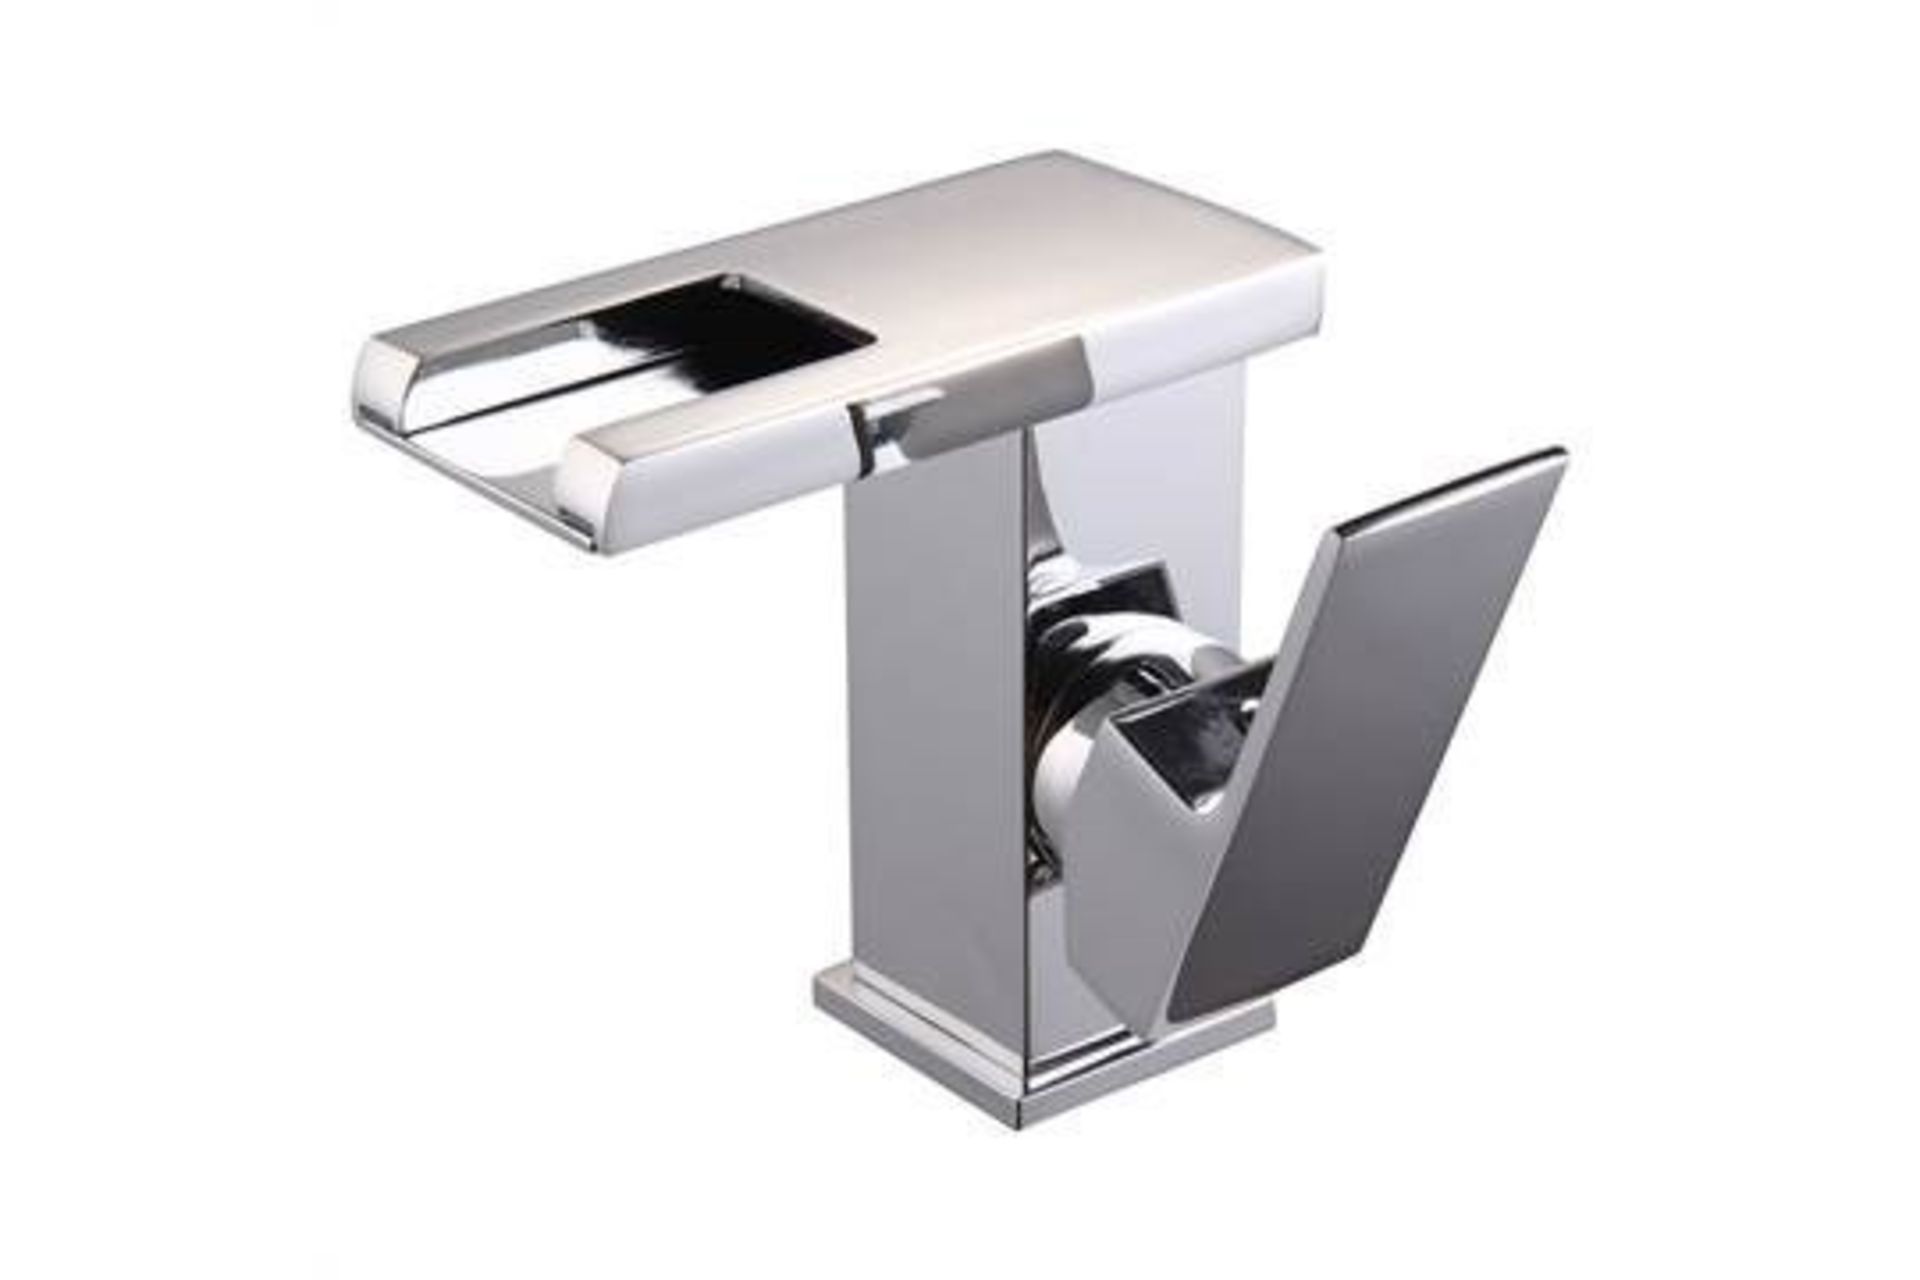 LED Waterfall Bathroom Basin Mixer Tap. RRP £229.99.Easy to install and clean.All copper mount... - Image 2 of 2